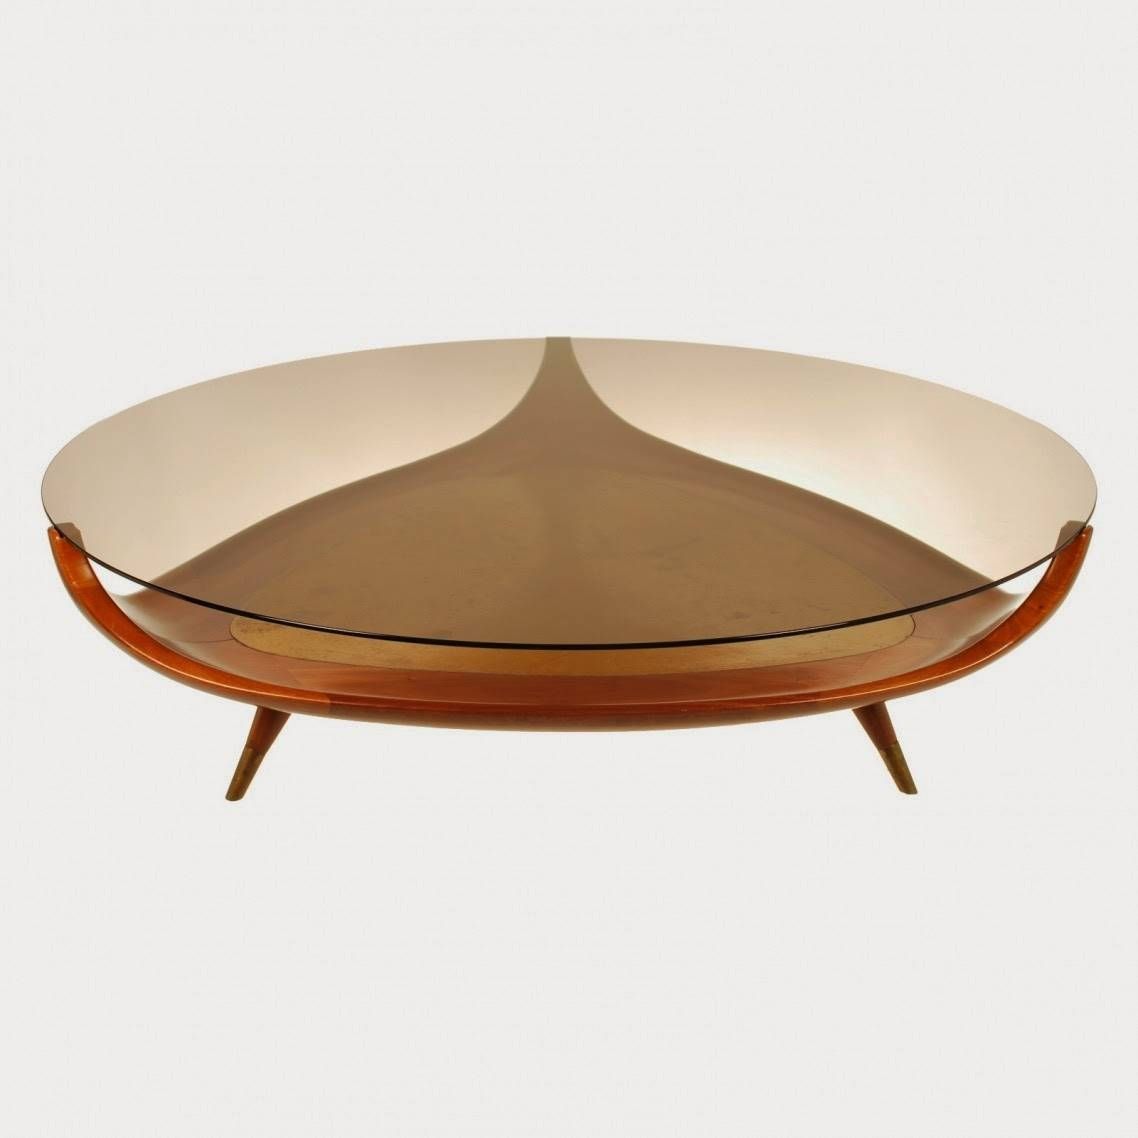 Furniture: Small Oval Coffee Table | Rustic Cocktail Table In Oversized Square Coffee Tables (View 30 of 30)